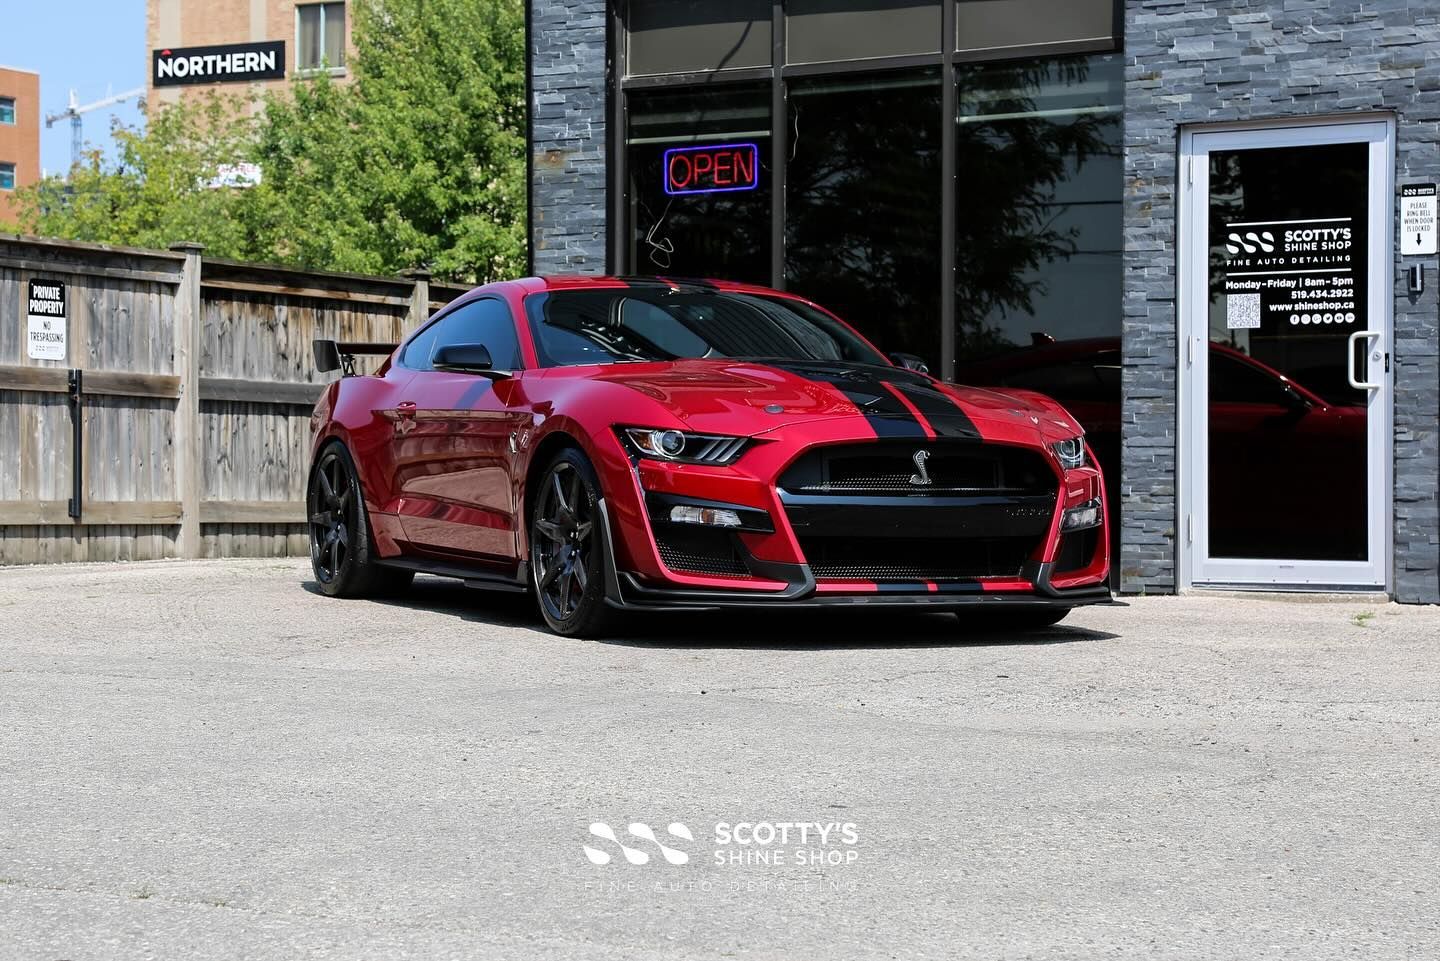 Ford Mustang GT500 Xpel Ultimate Plus Paint Protection Film, Xpel Prime XR Plus Ceramic Window Tint and Modesta Ceramic Coatings on the Body, Wheels and Glass London, Ontario Canada